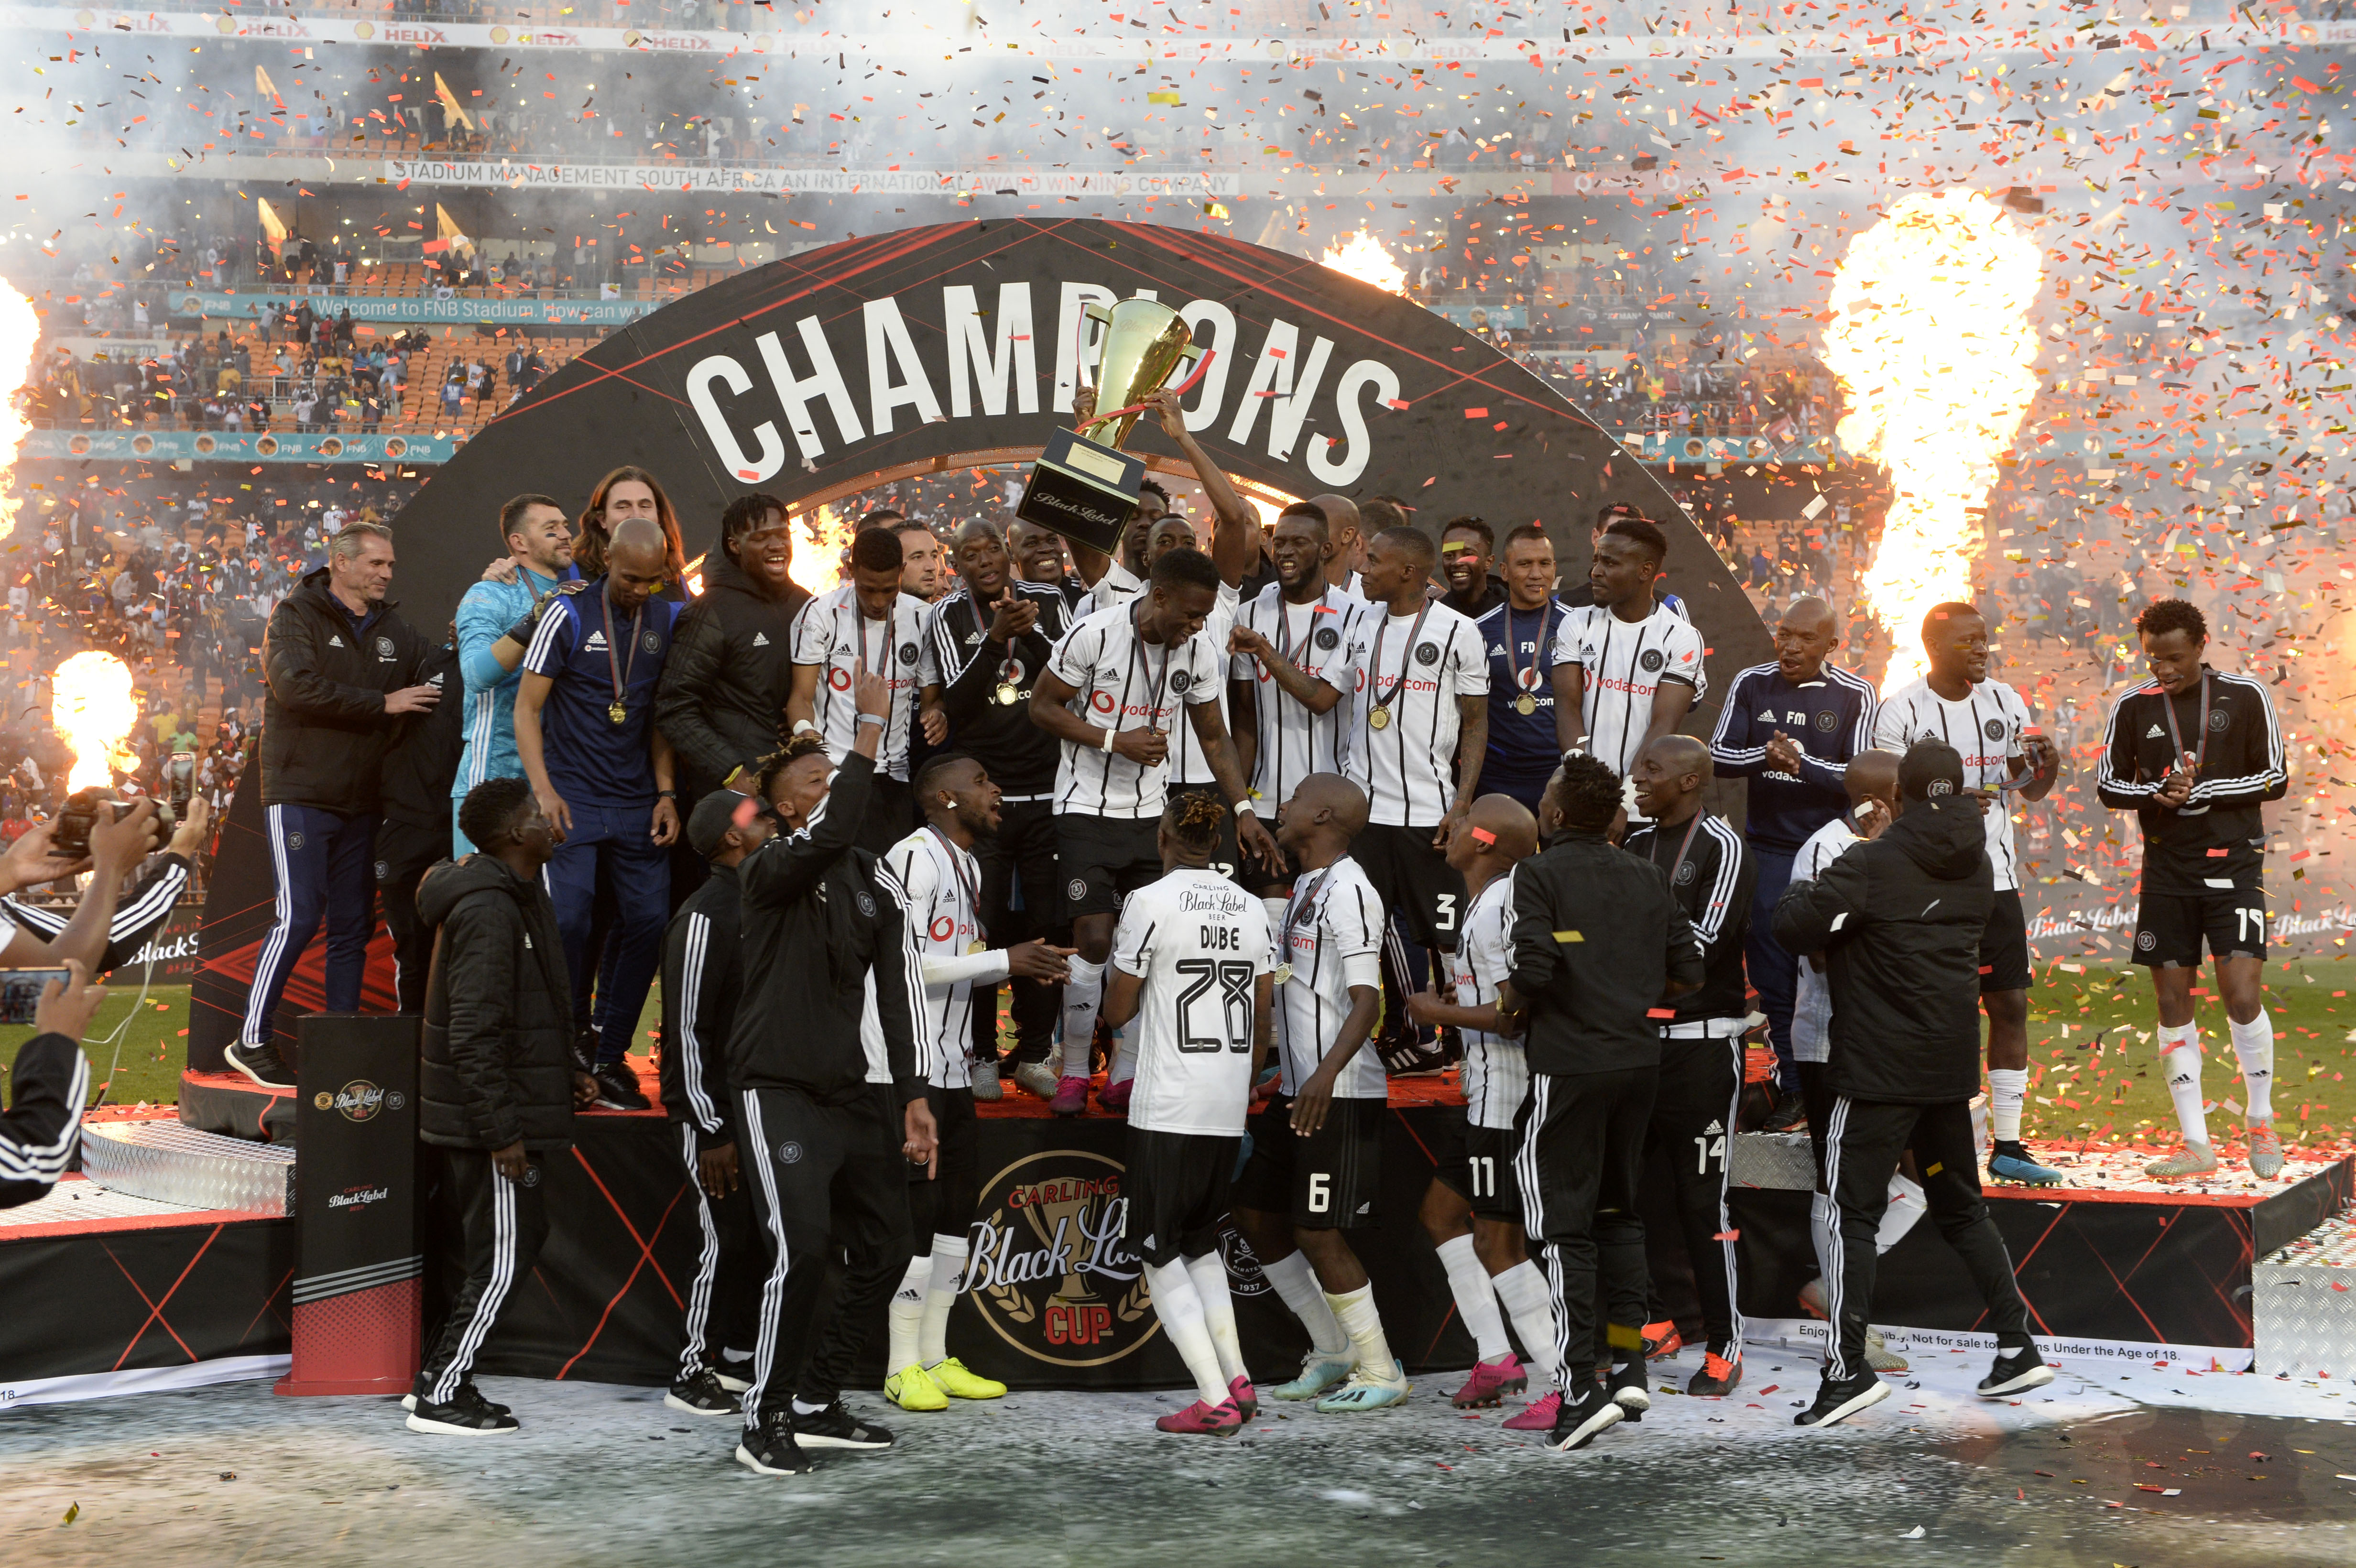 JOHANNESBURG, SOUTH AFRICA - JULY 27: Pirates celebrate following the Carling Black Label Cup match between Orlando Pirates and Kaizer Chiefs at FNB Stadium on July 27, 2019 in Johannesburg, South Africa. (Photo by Lee Warren/Gallo Images/Getty Images)